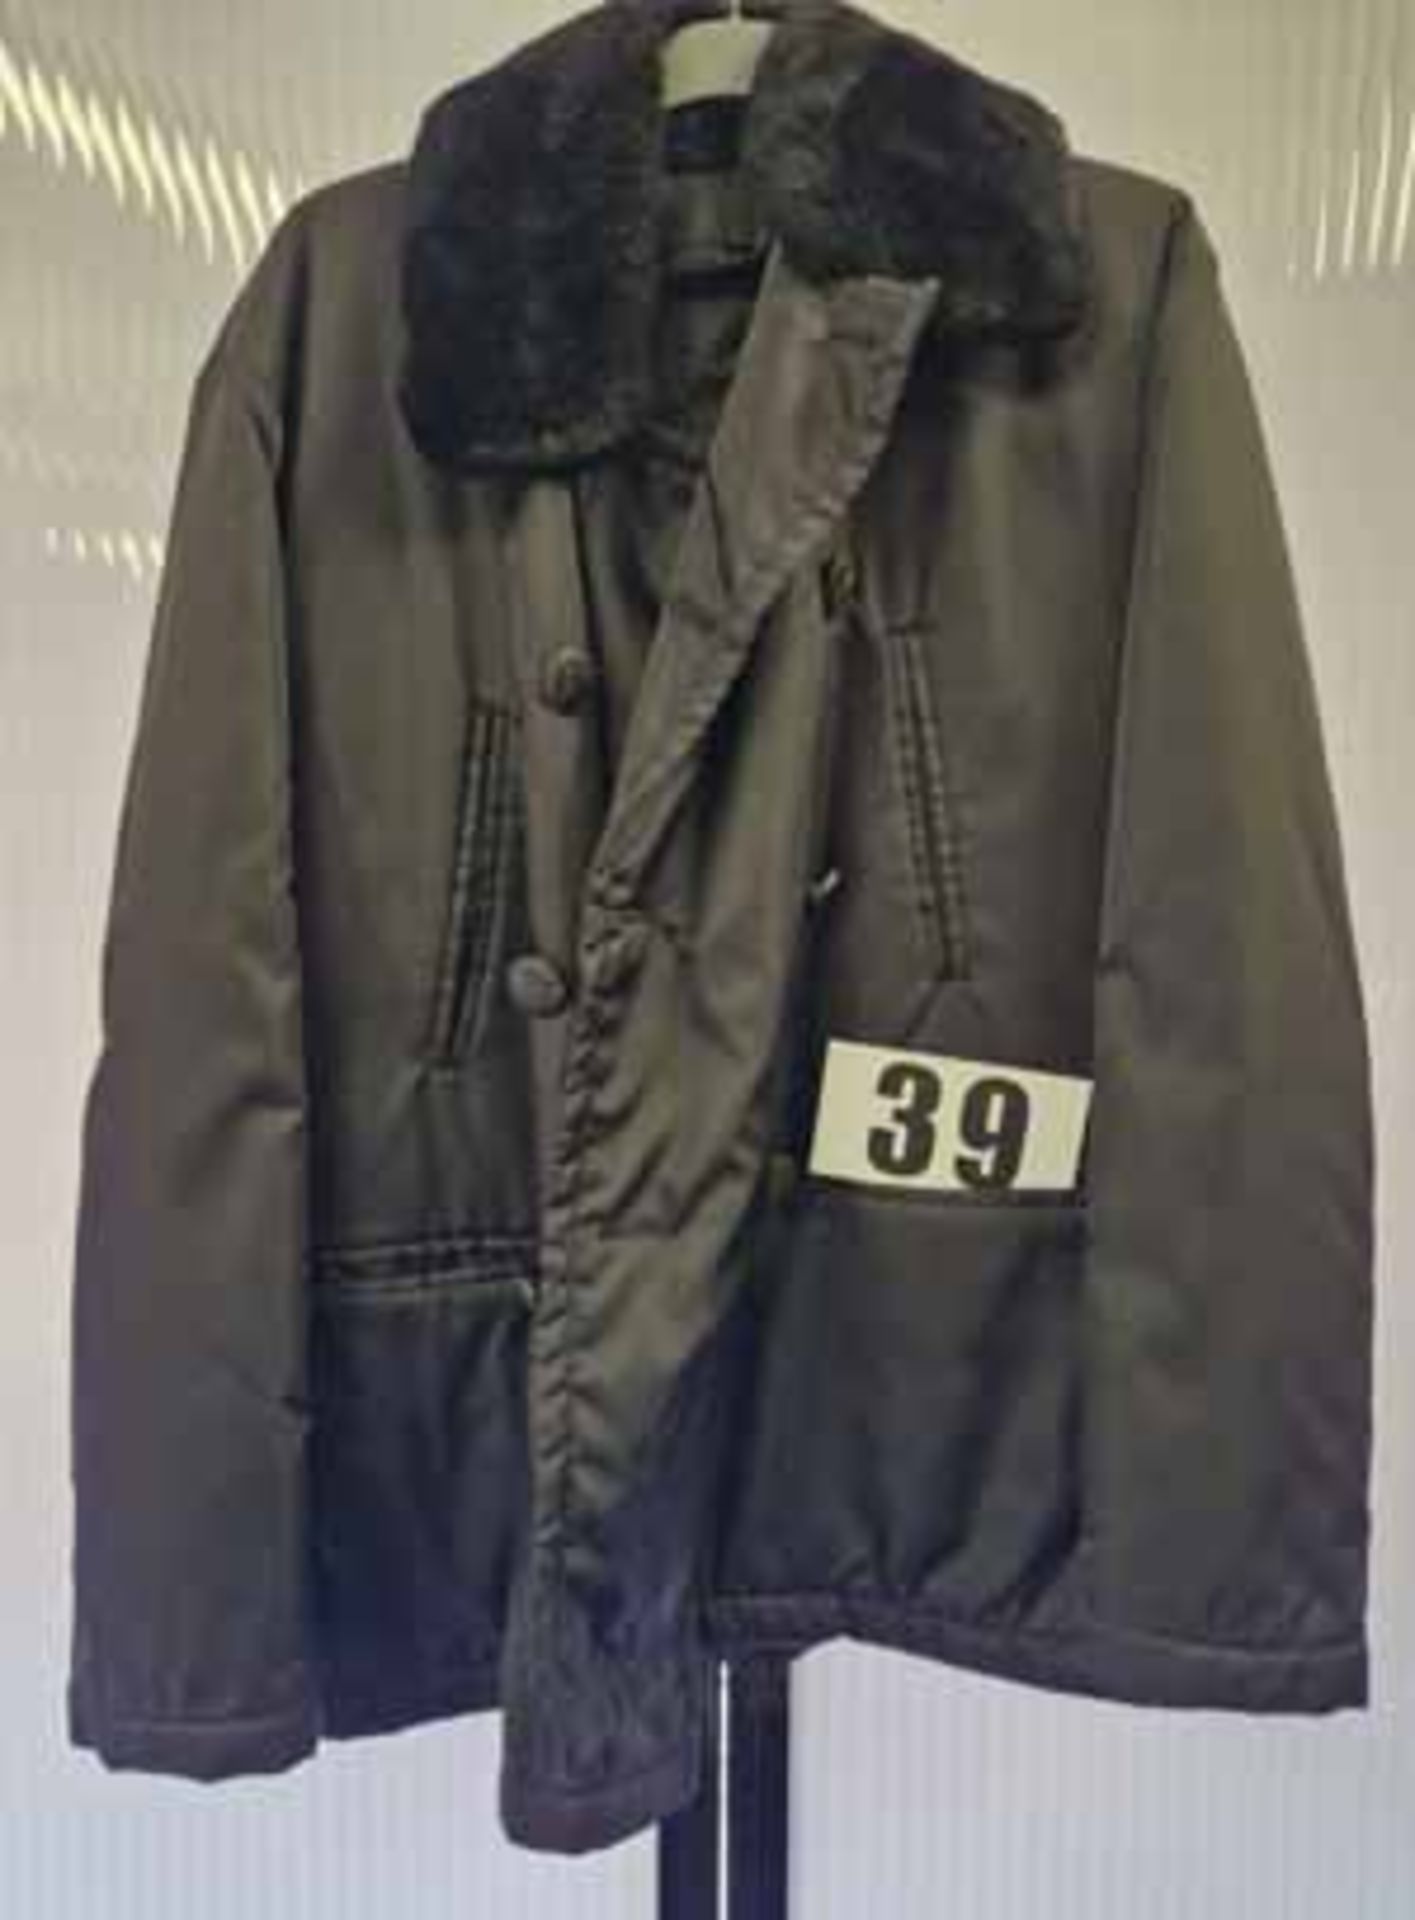 A PRADA Re-Nylon Black Padded Coat with Viscose Lining, Faux Fur Trim Collar, Double Breasted Button